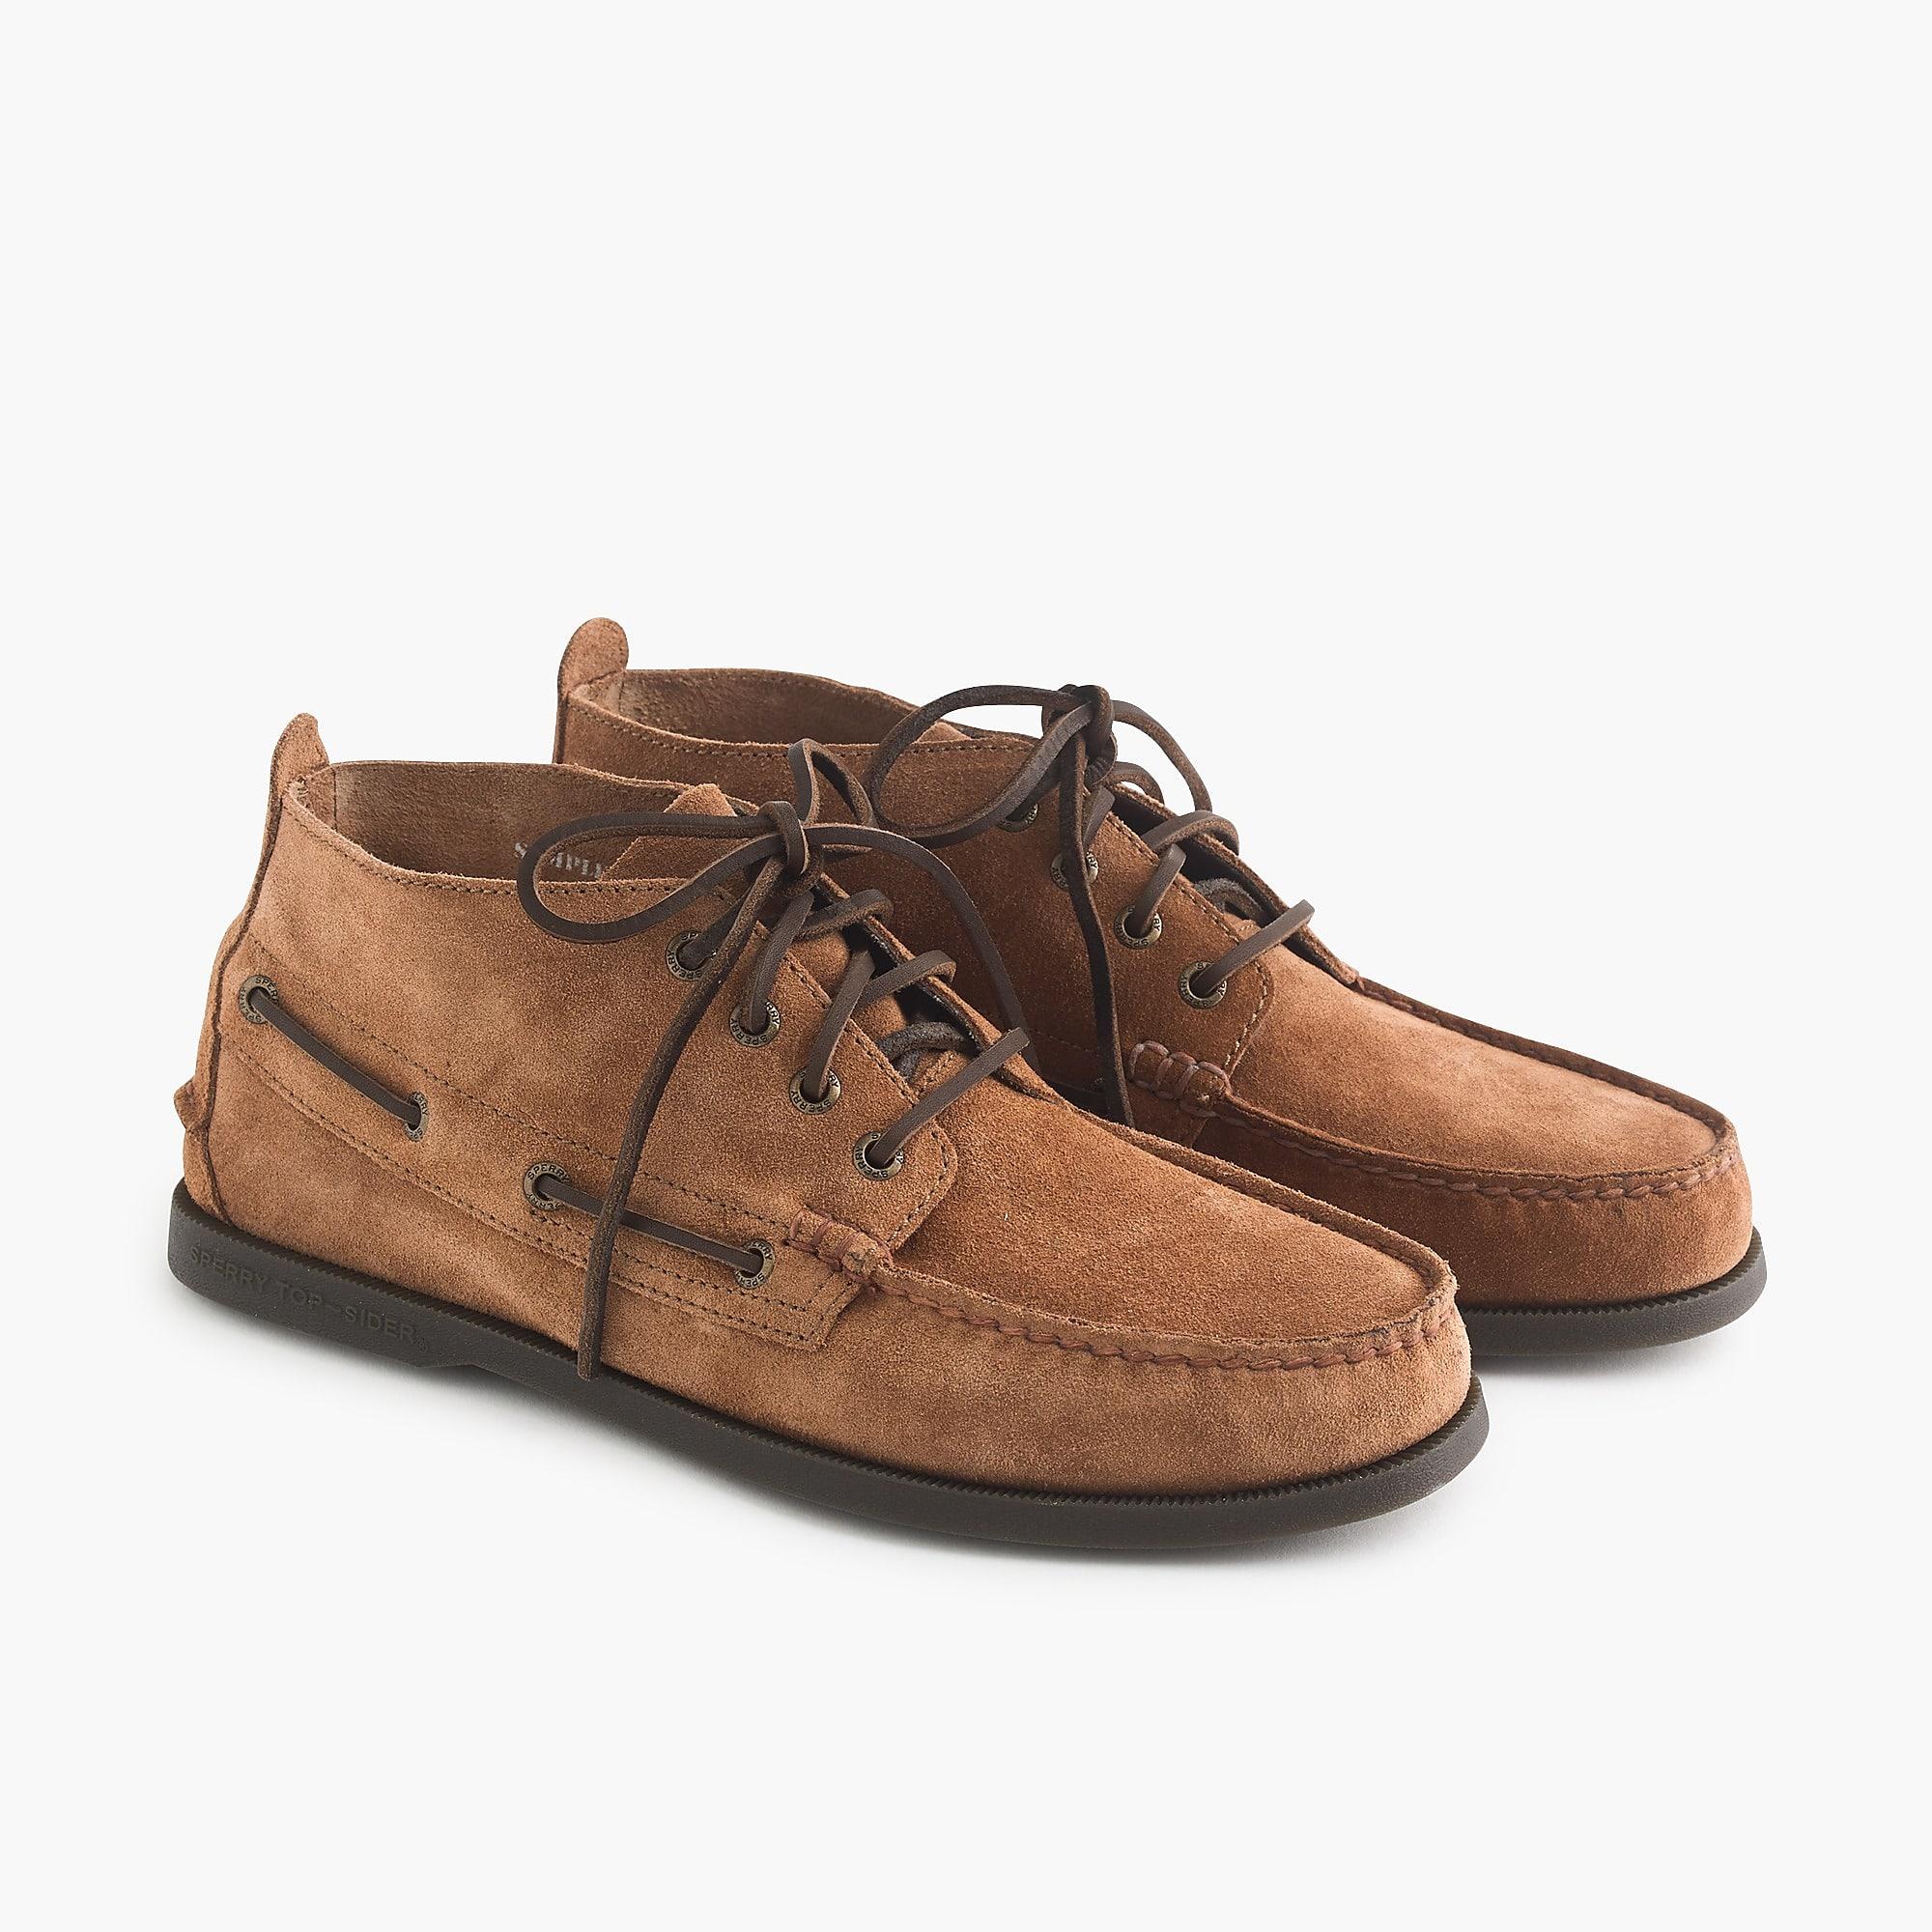 Sperry Top-Sider Suede Chukka Boots in Dark Tan (Brown) for Men - Lyst